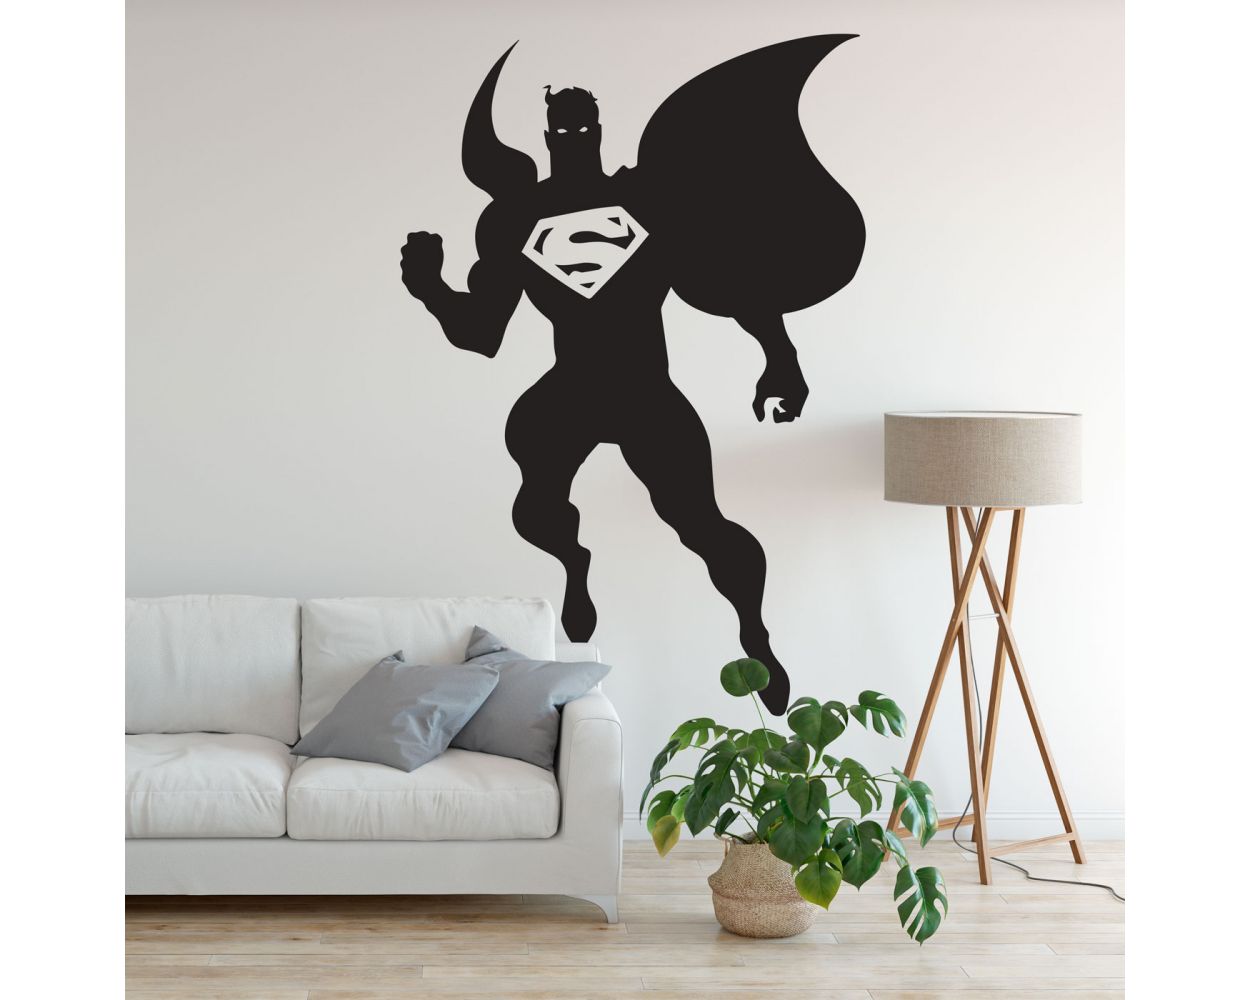 Superman Silhouette Wall Decal for Gaming Room 